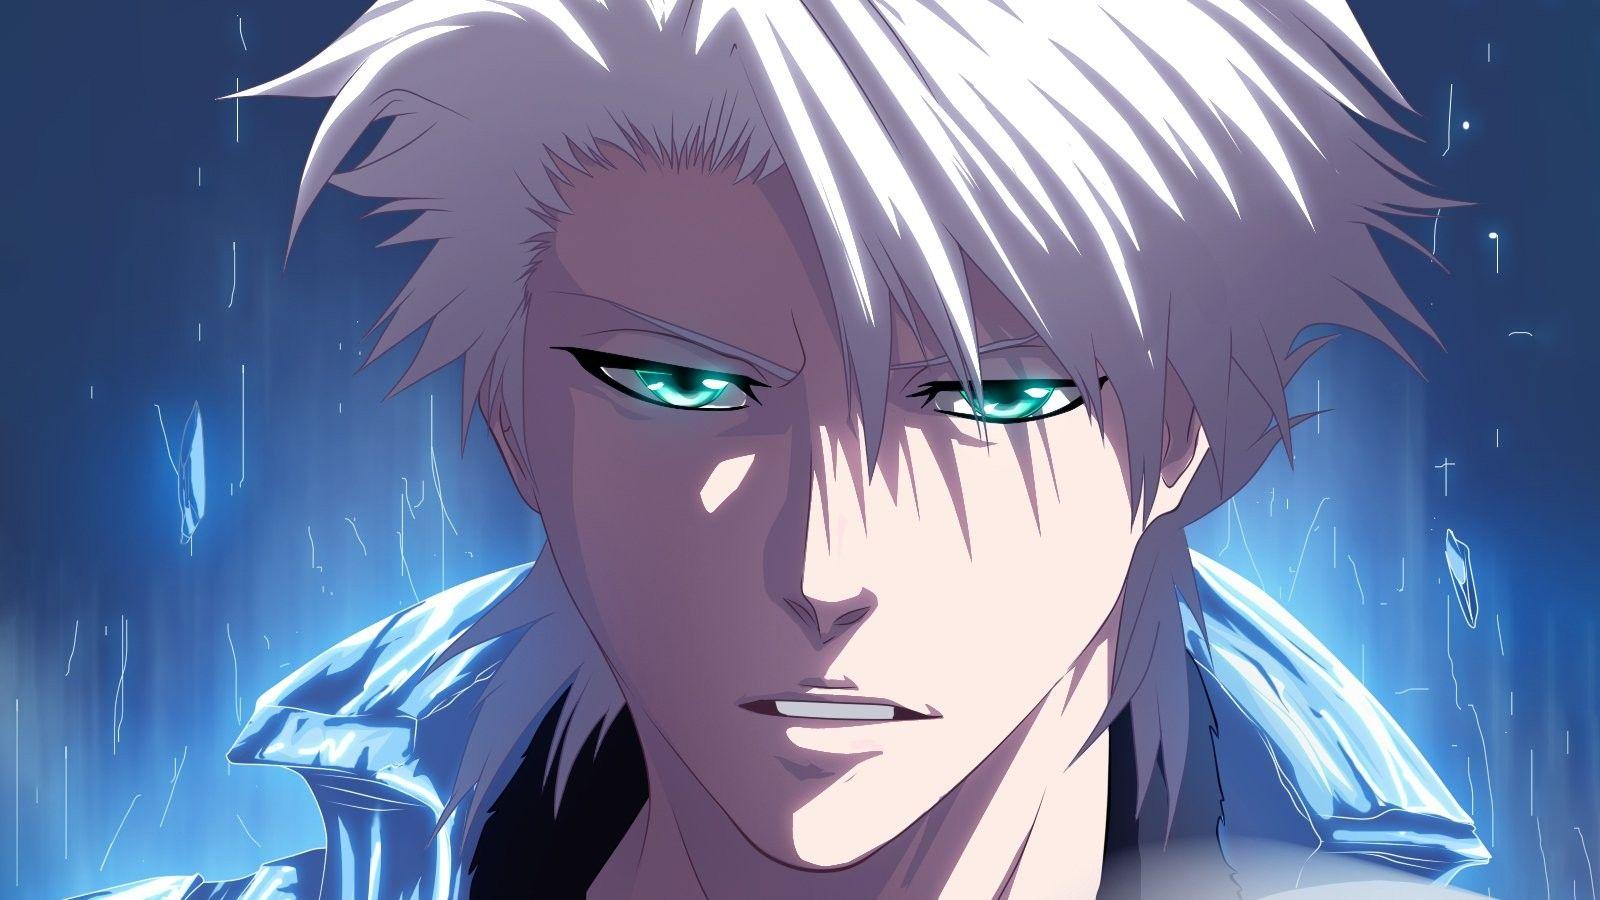 Boy With White Hair Anime Render  500x708 PNG Download  PNGkit